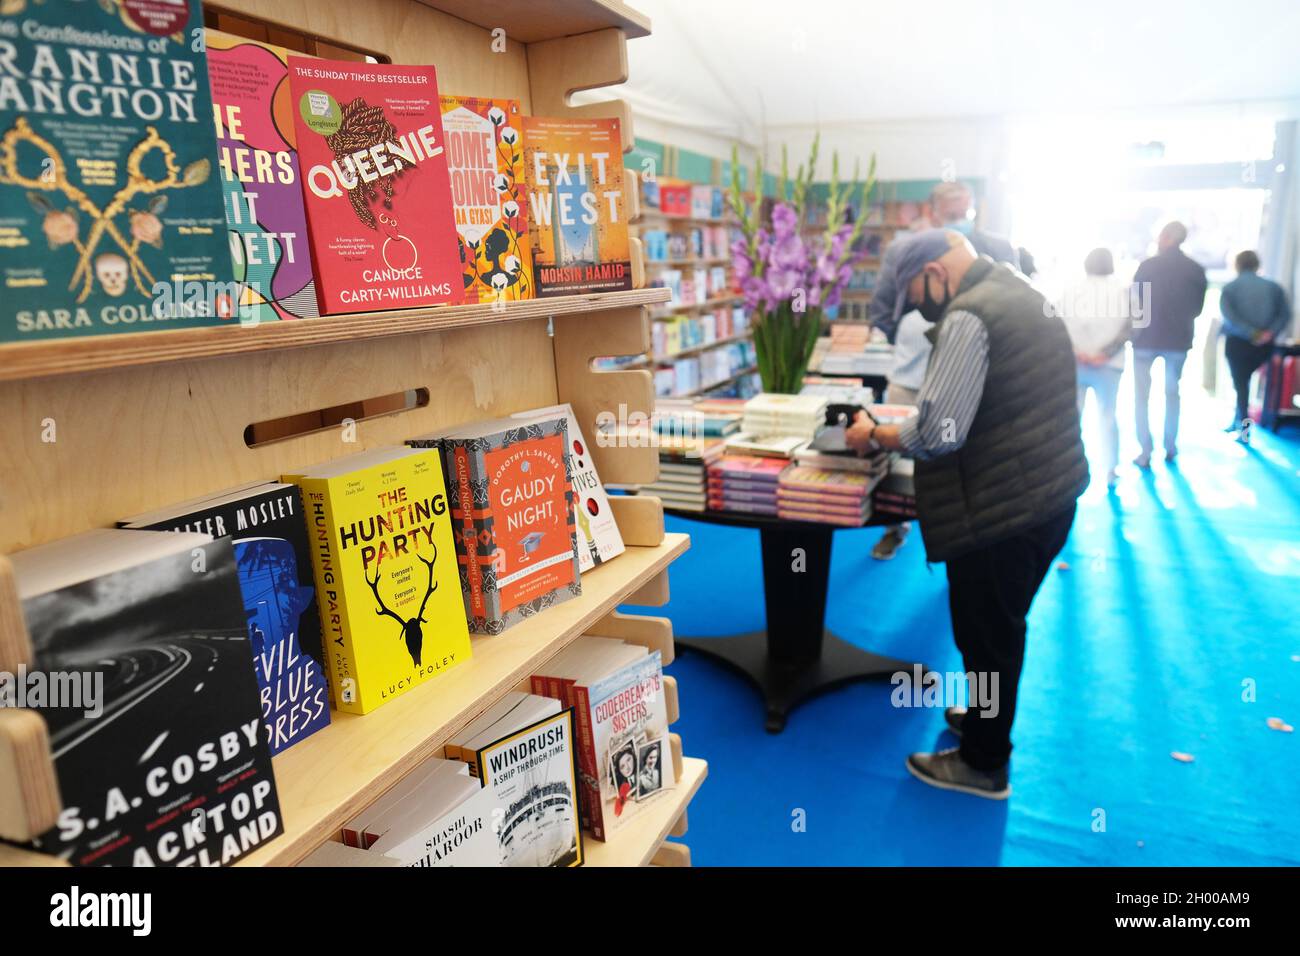 Cheltenham Literature Festival, Cheltenham, UK - Sunday 10th October 2021 - Busy scene inside the Festival bookshop on a sunny Sunday afternoon - the book Festival runs until Sunday 17th October - book sales have soared during the pandemic. Photo Steven May / Alamy Live News Stock Photo